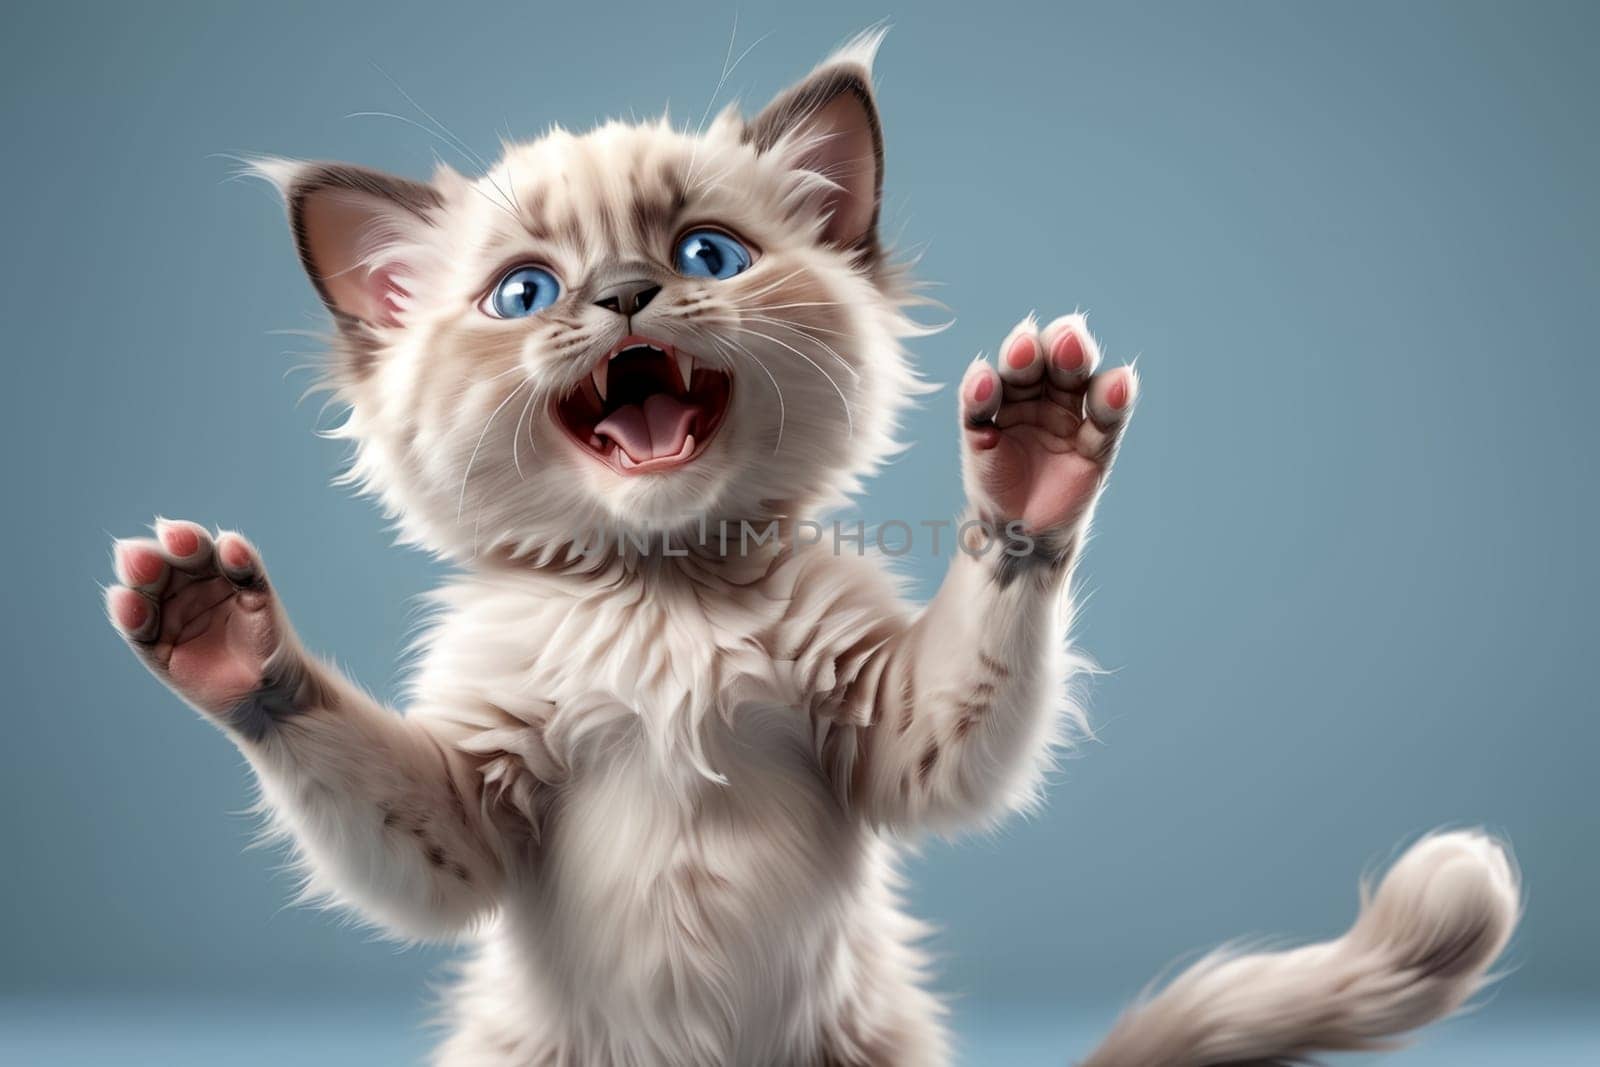 the cat is delighted with his paws raised up, isolated on a blue background by Rawlik